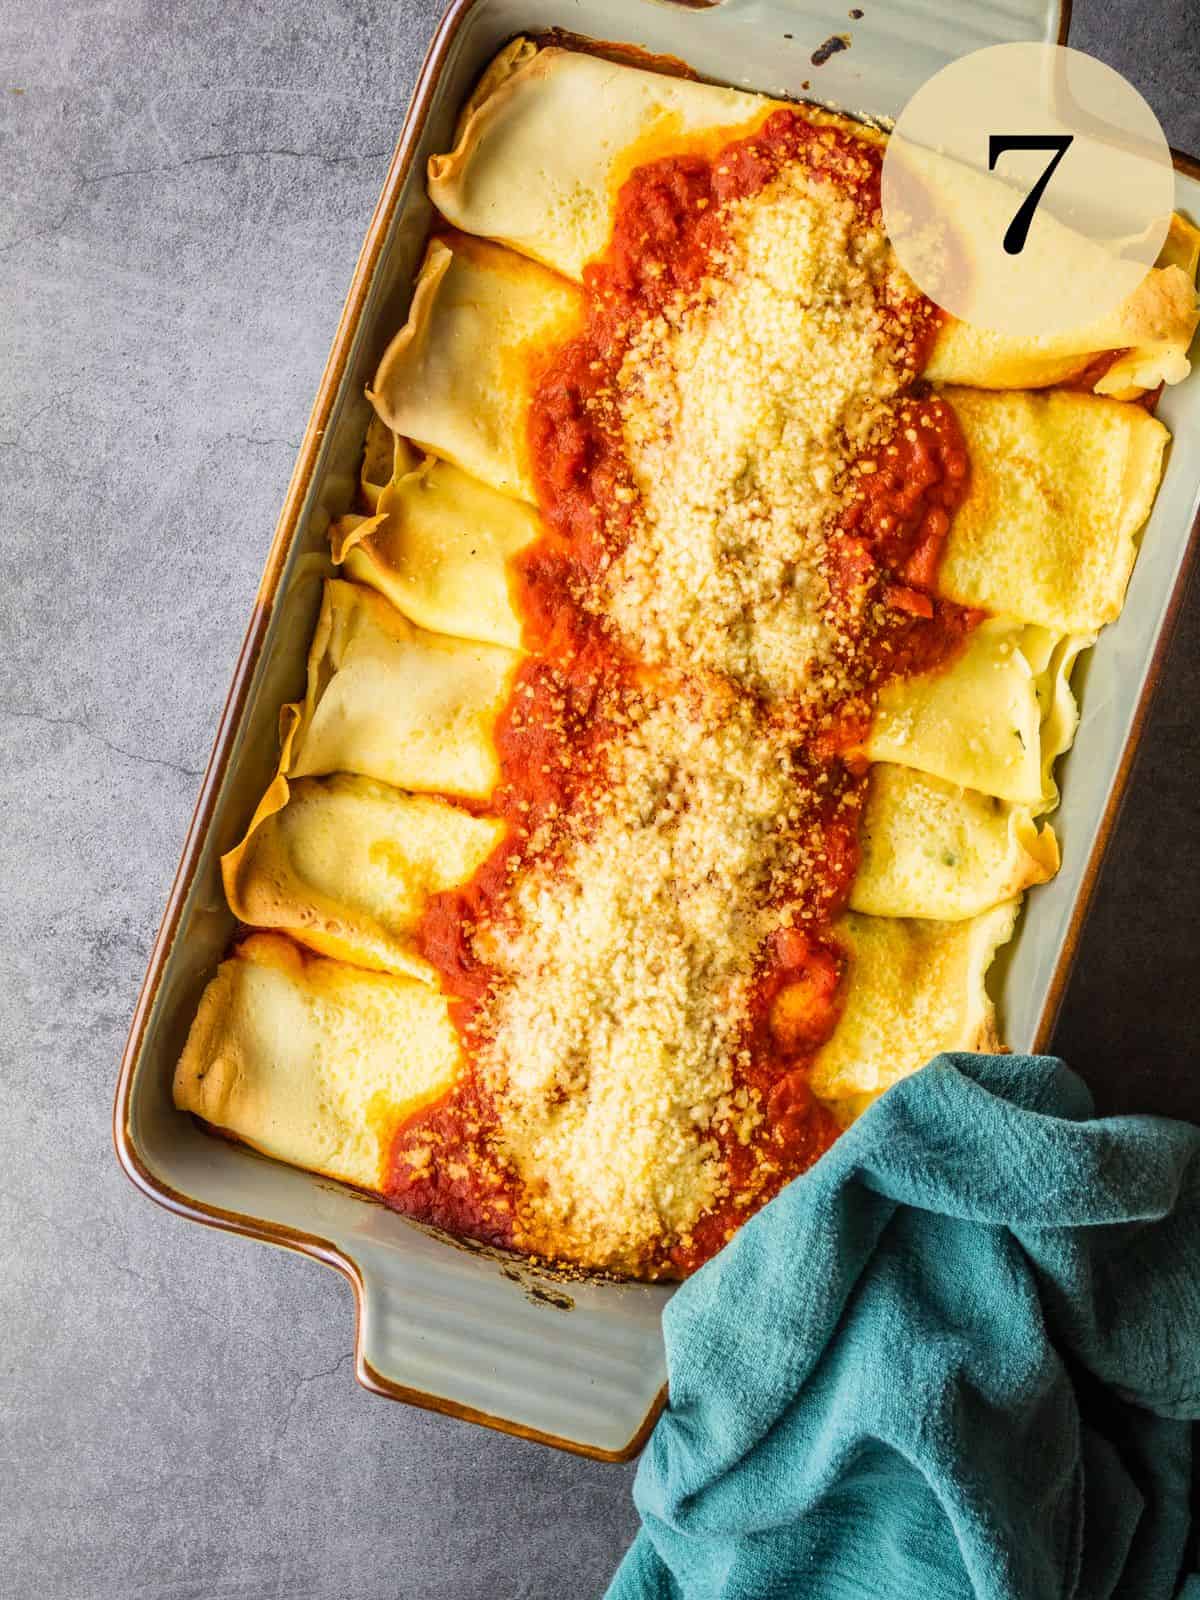 baked manicotti in a baking dish next to a green linen napkin.